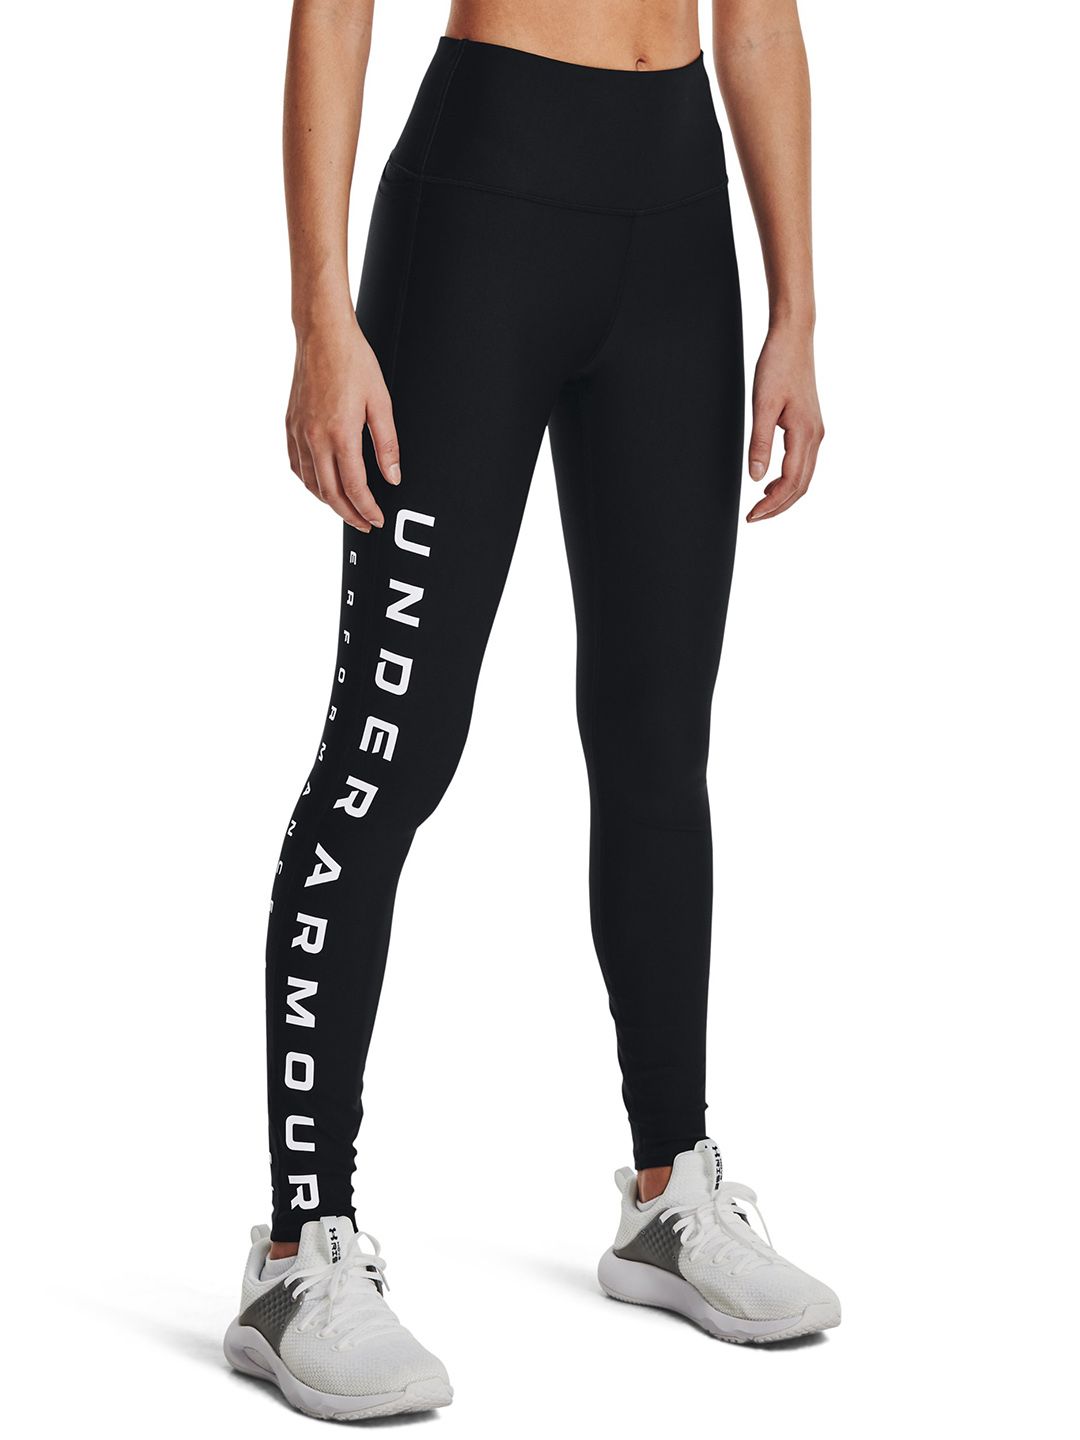 UNDER ARMOUR Women Black Heat Gear High-Rise No-Slip Waistband Full-Length Tights Price in India